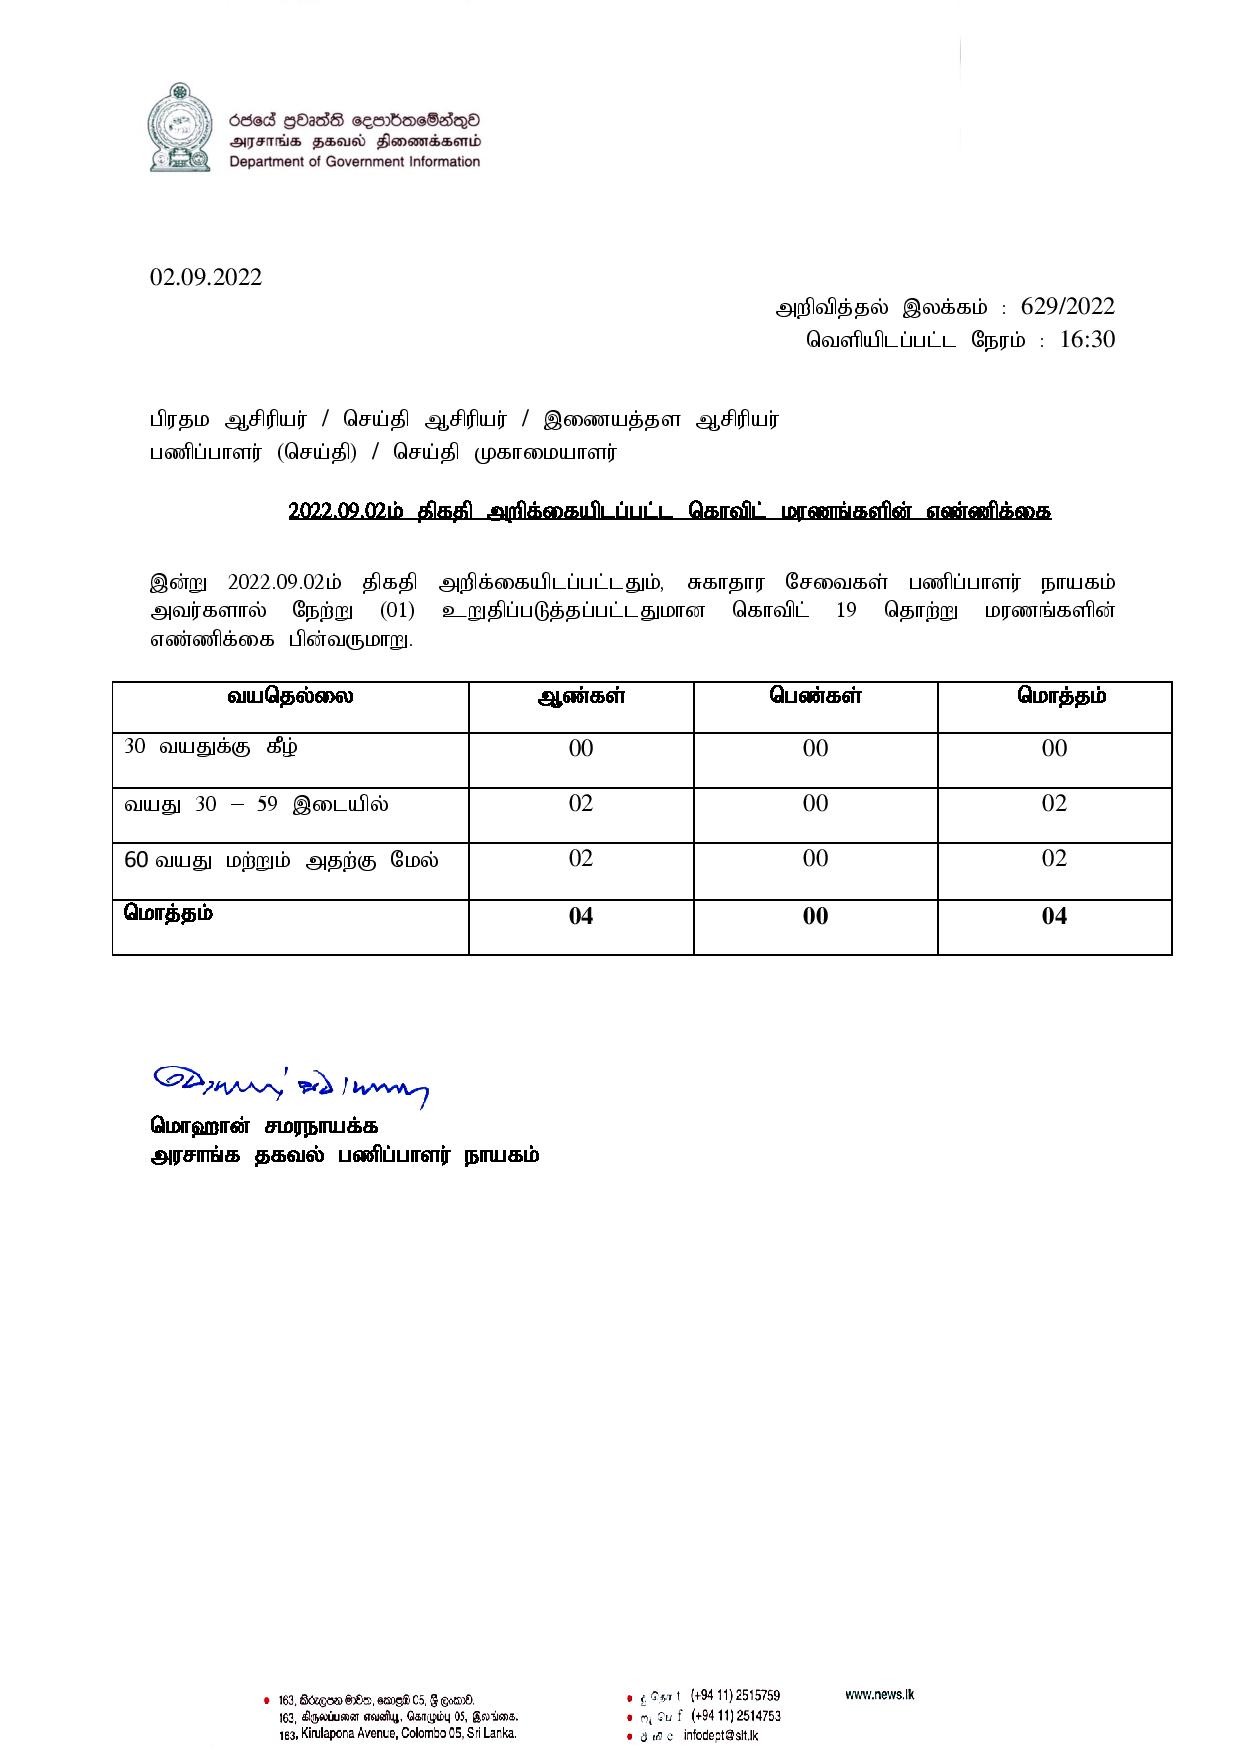 Press Release 629 Tamil page 001